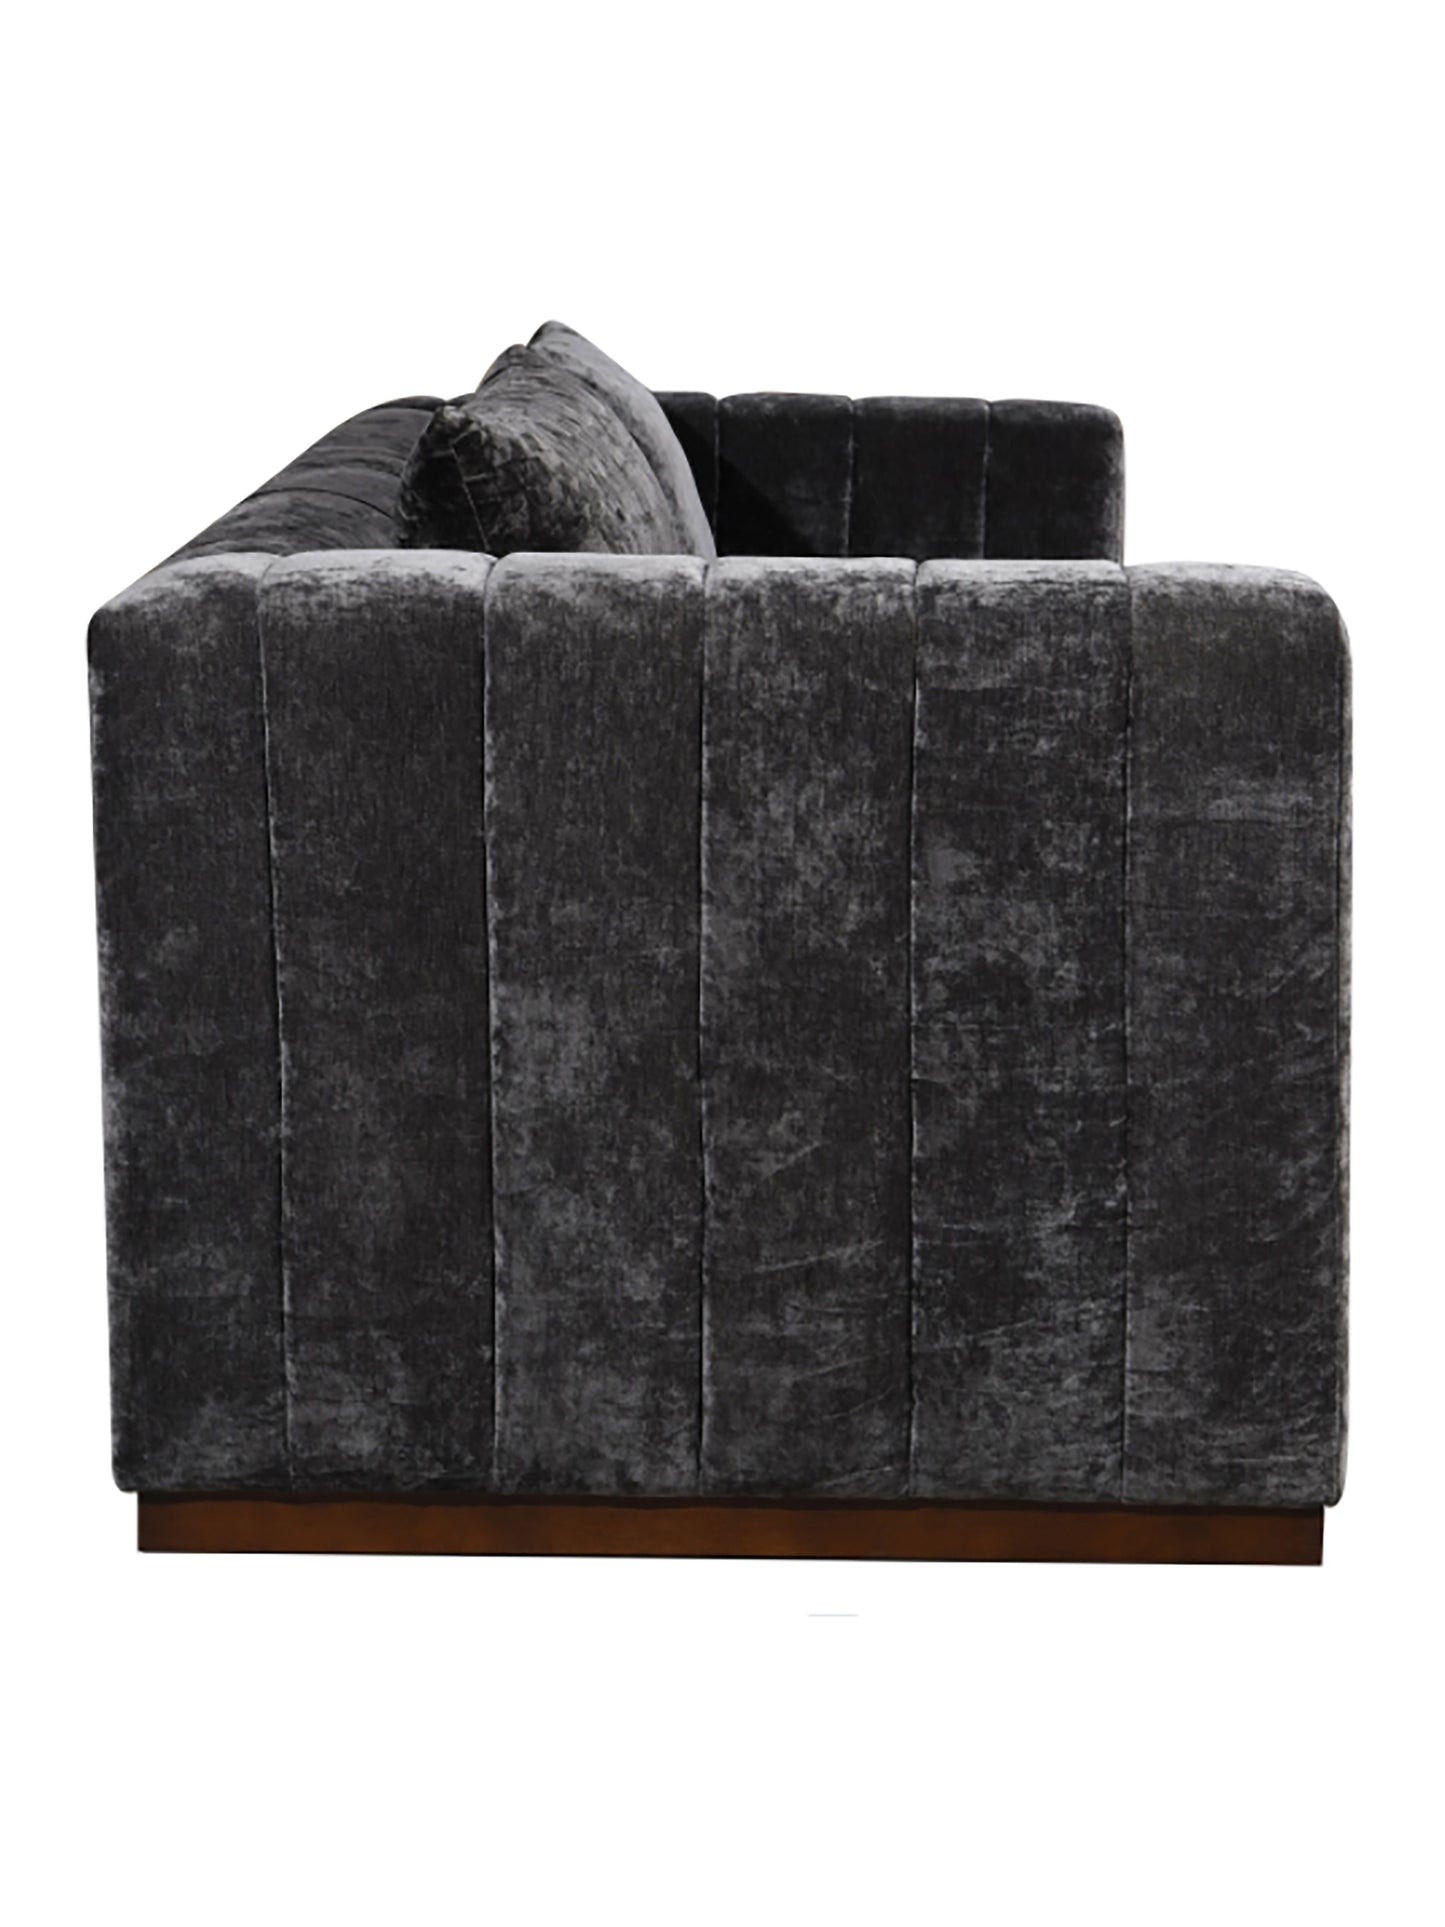 Eclectic Home Sofa Storme Prism Black